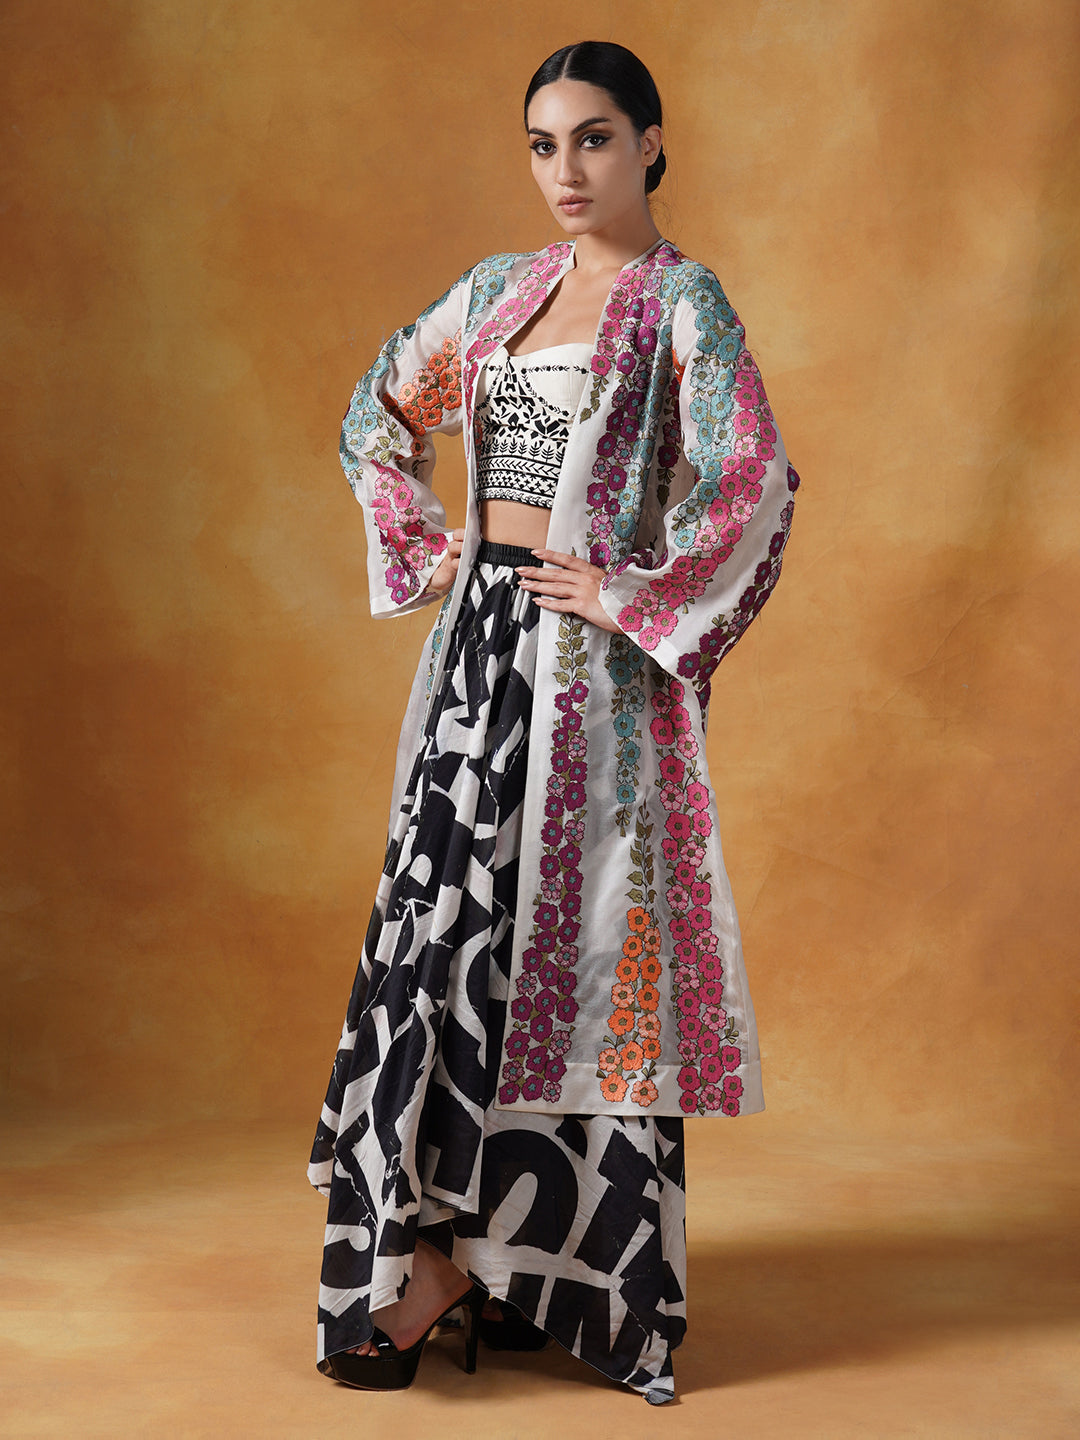 organza jacket adorned in beautiful silk thread floral embroidery over a white embellished tube to and printed skirt